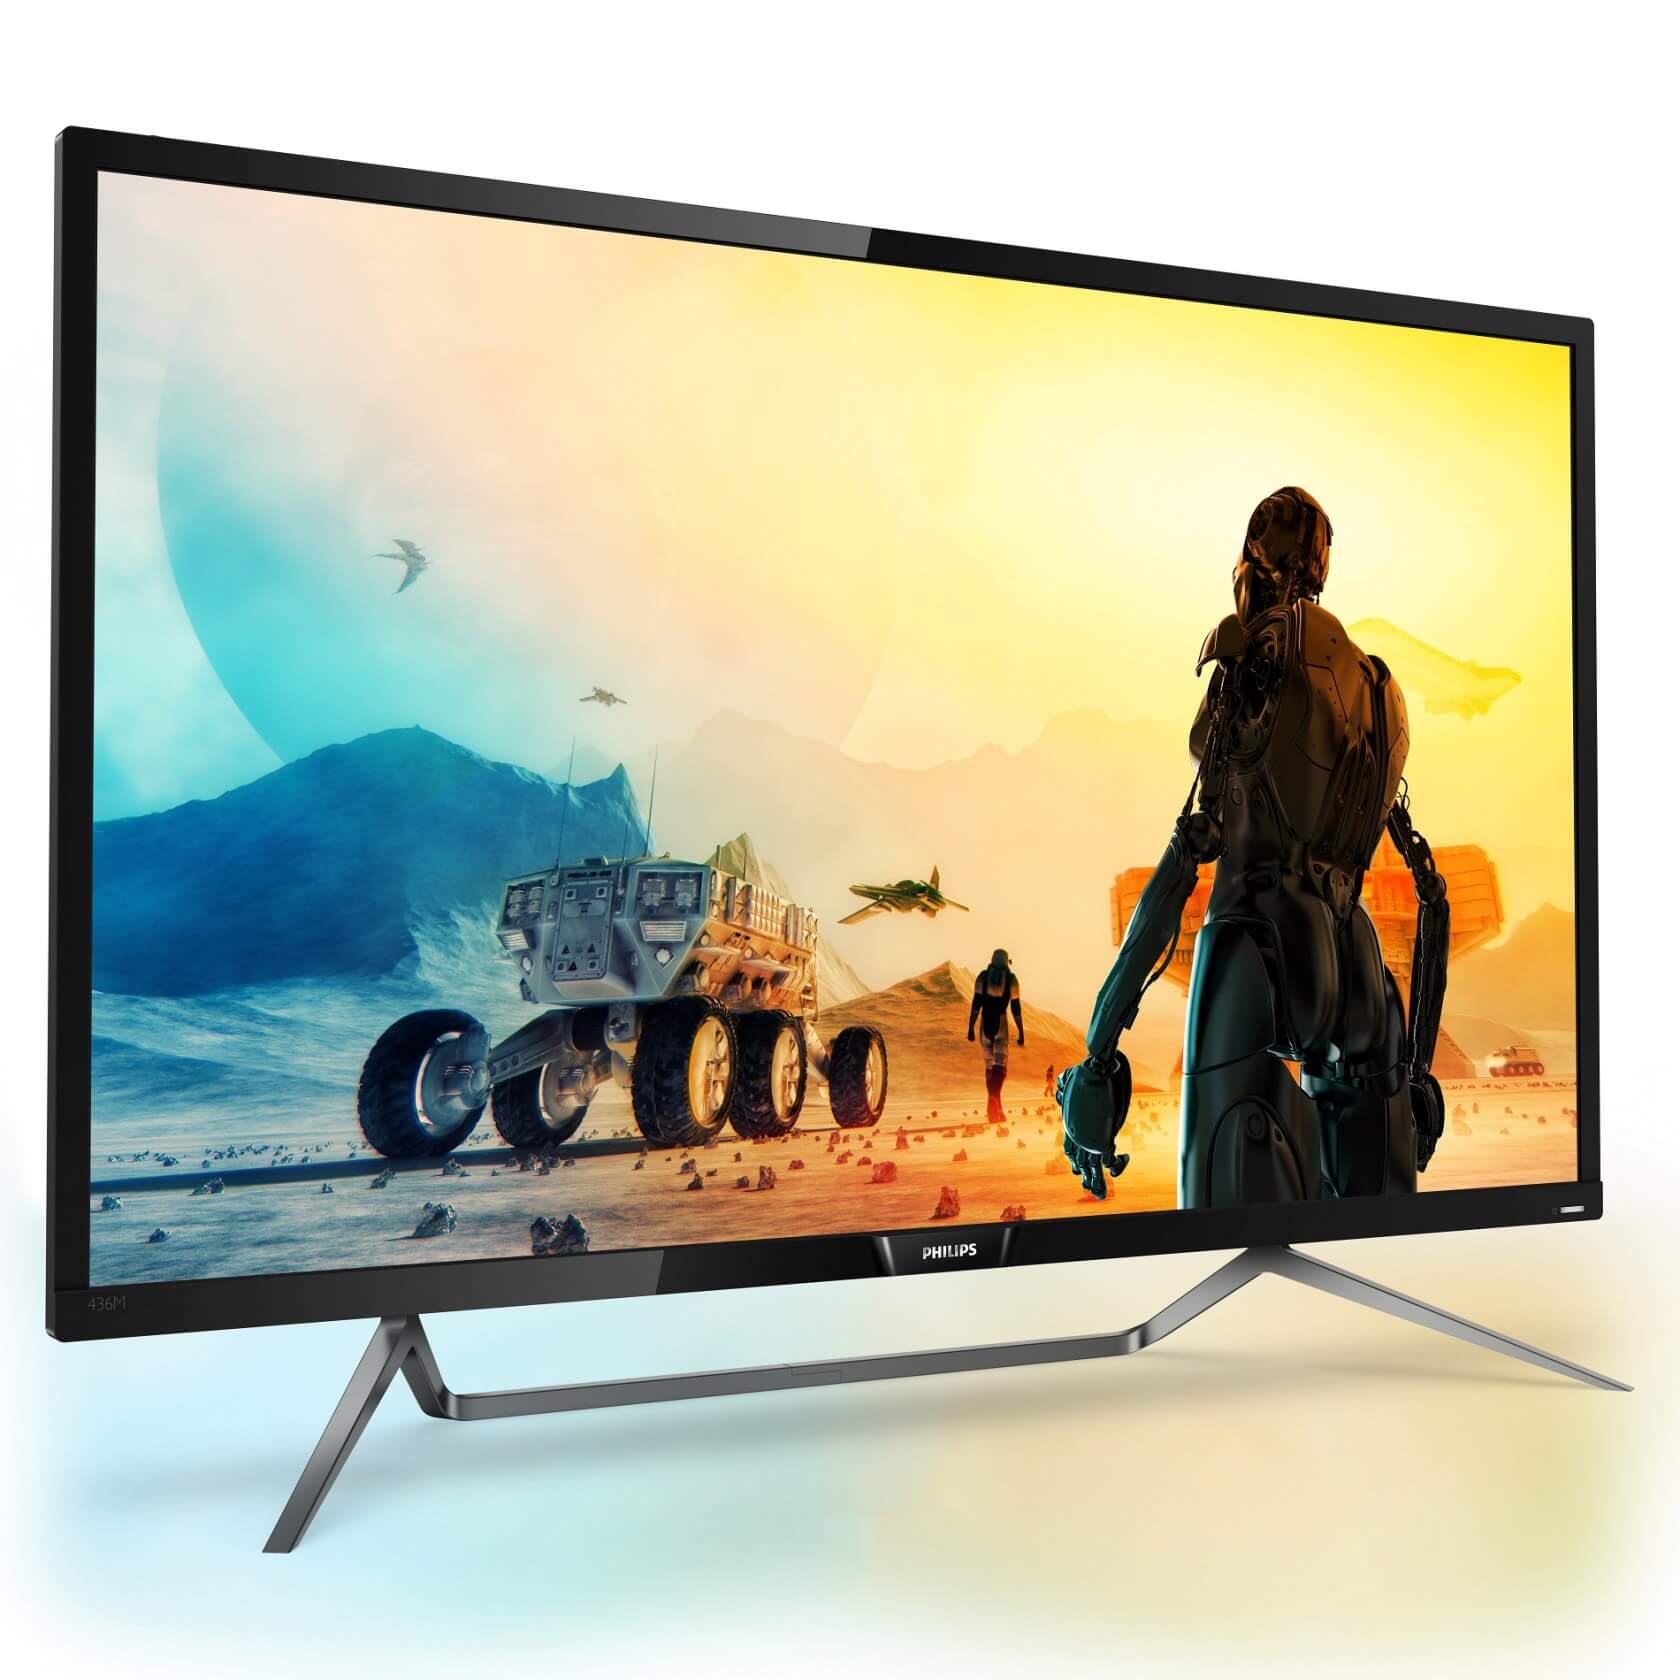 Philips' 43-inch, DisplayHDR 1000-certified monitor goes on sale for $999